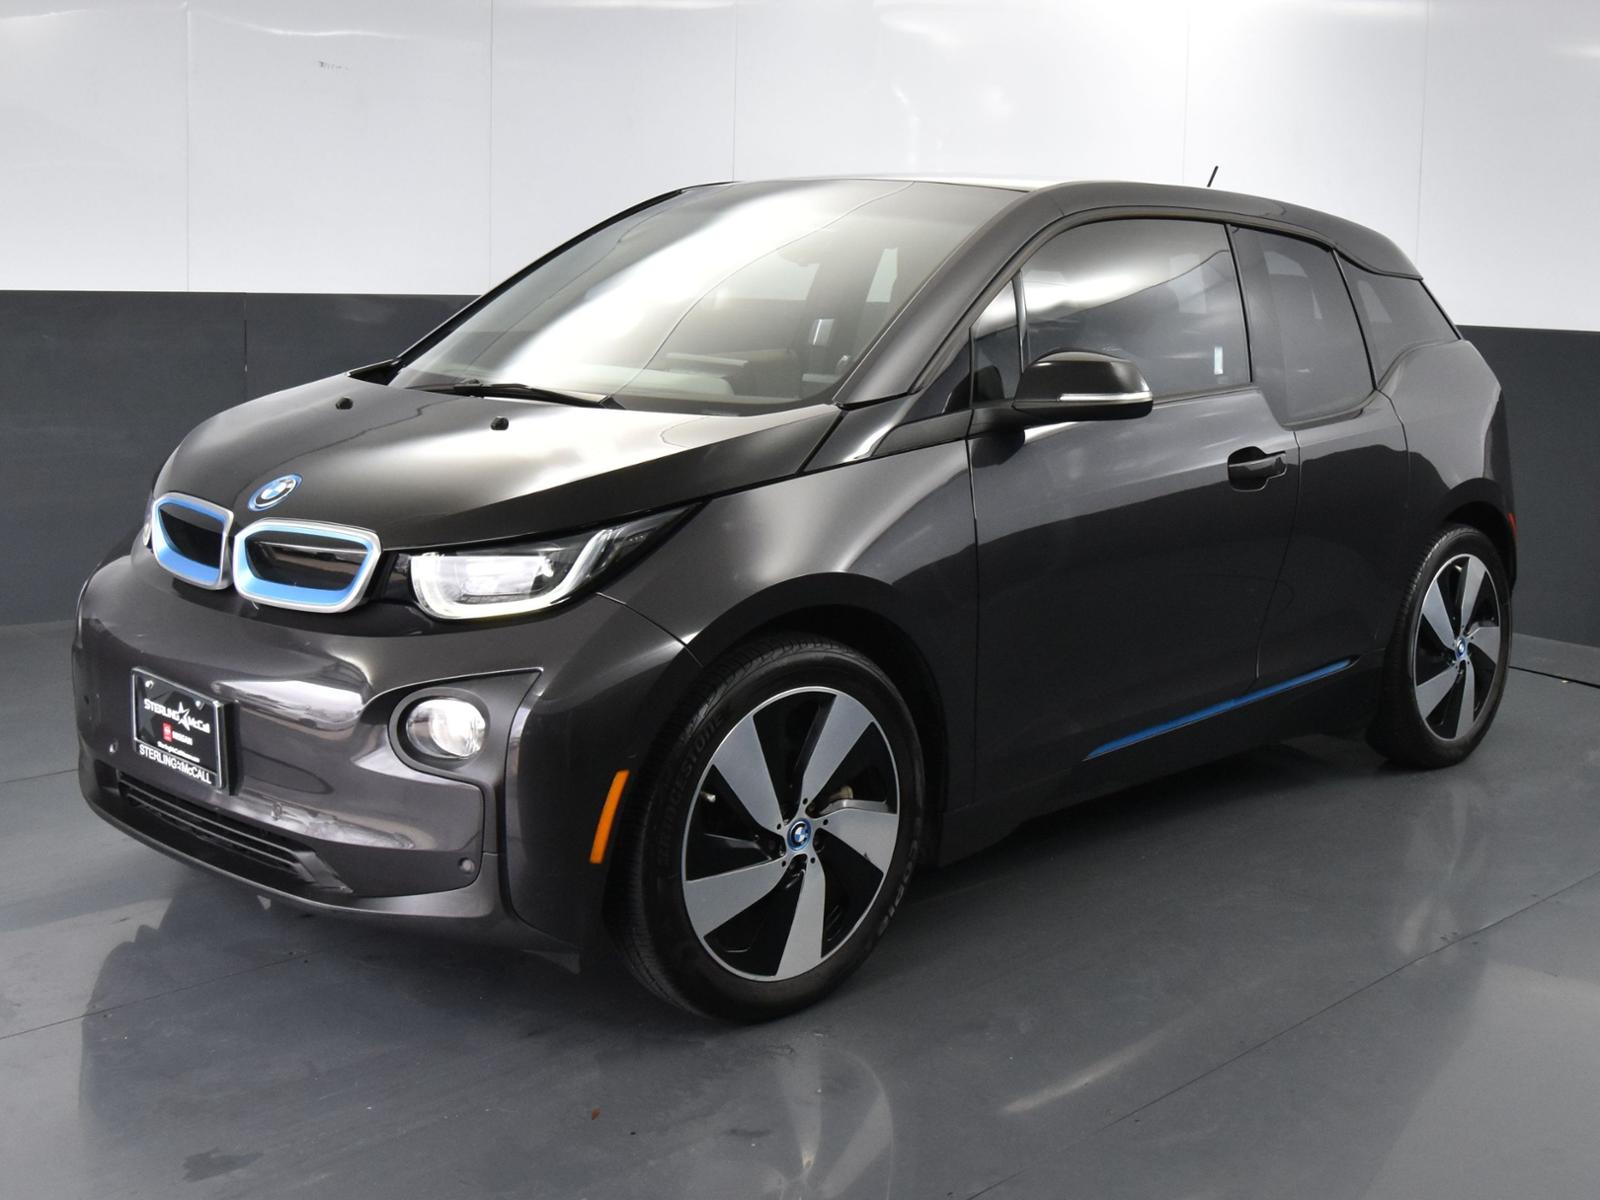 Pre-Owned 2015 BMW i3 4dr HB w/Range Extender 4dr Car in Houston #FV501916  | Sterling McCall Lexus Clear Lake